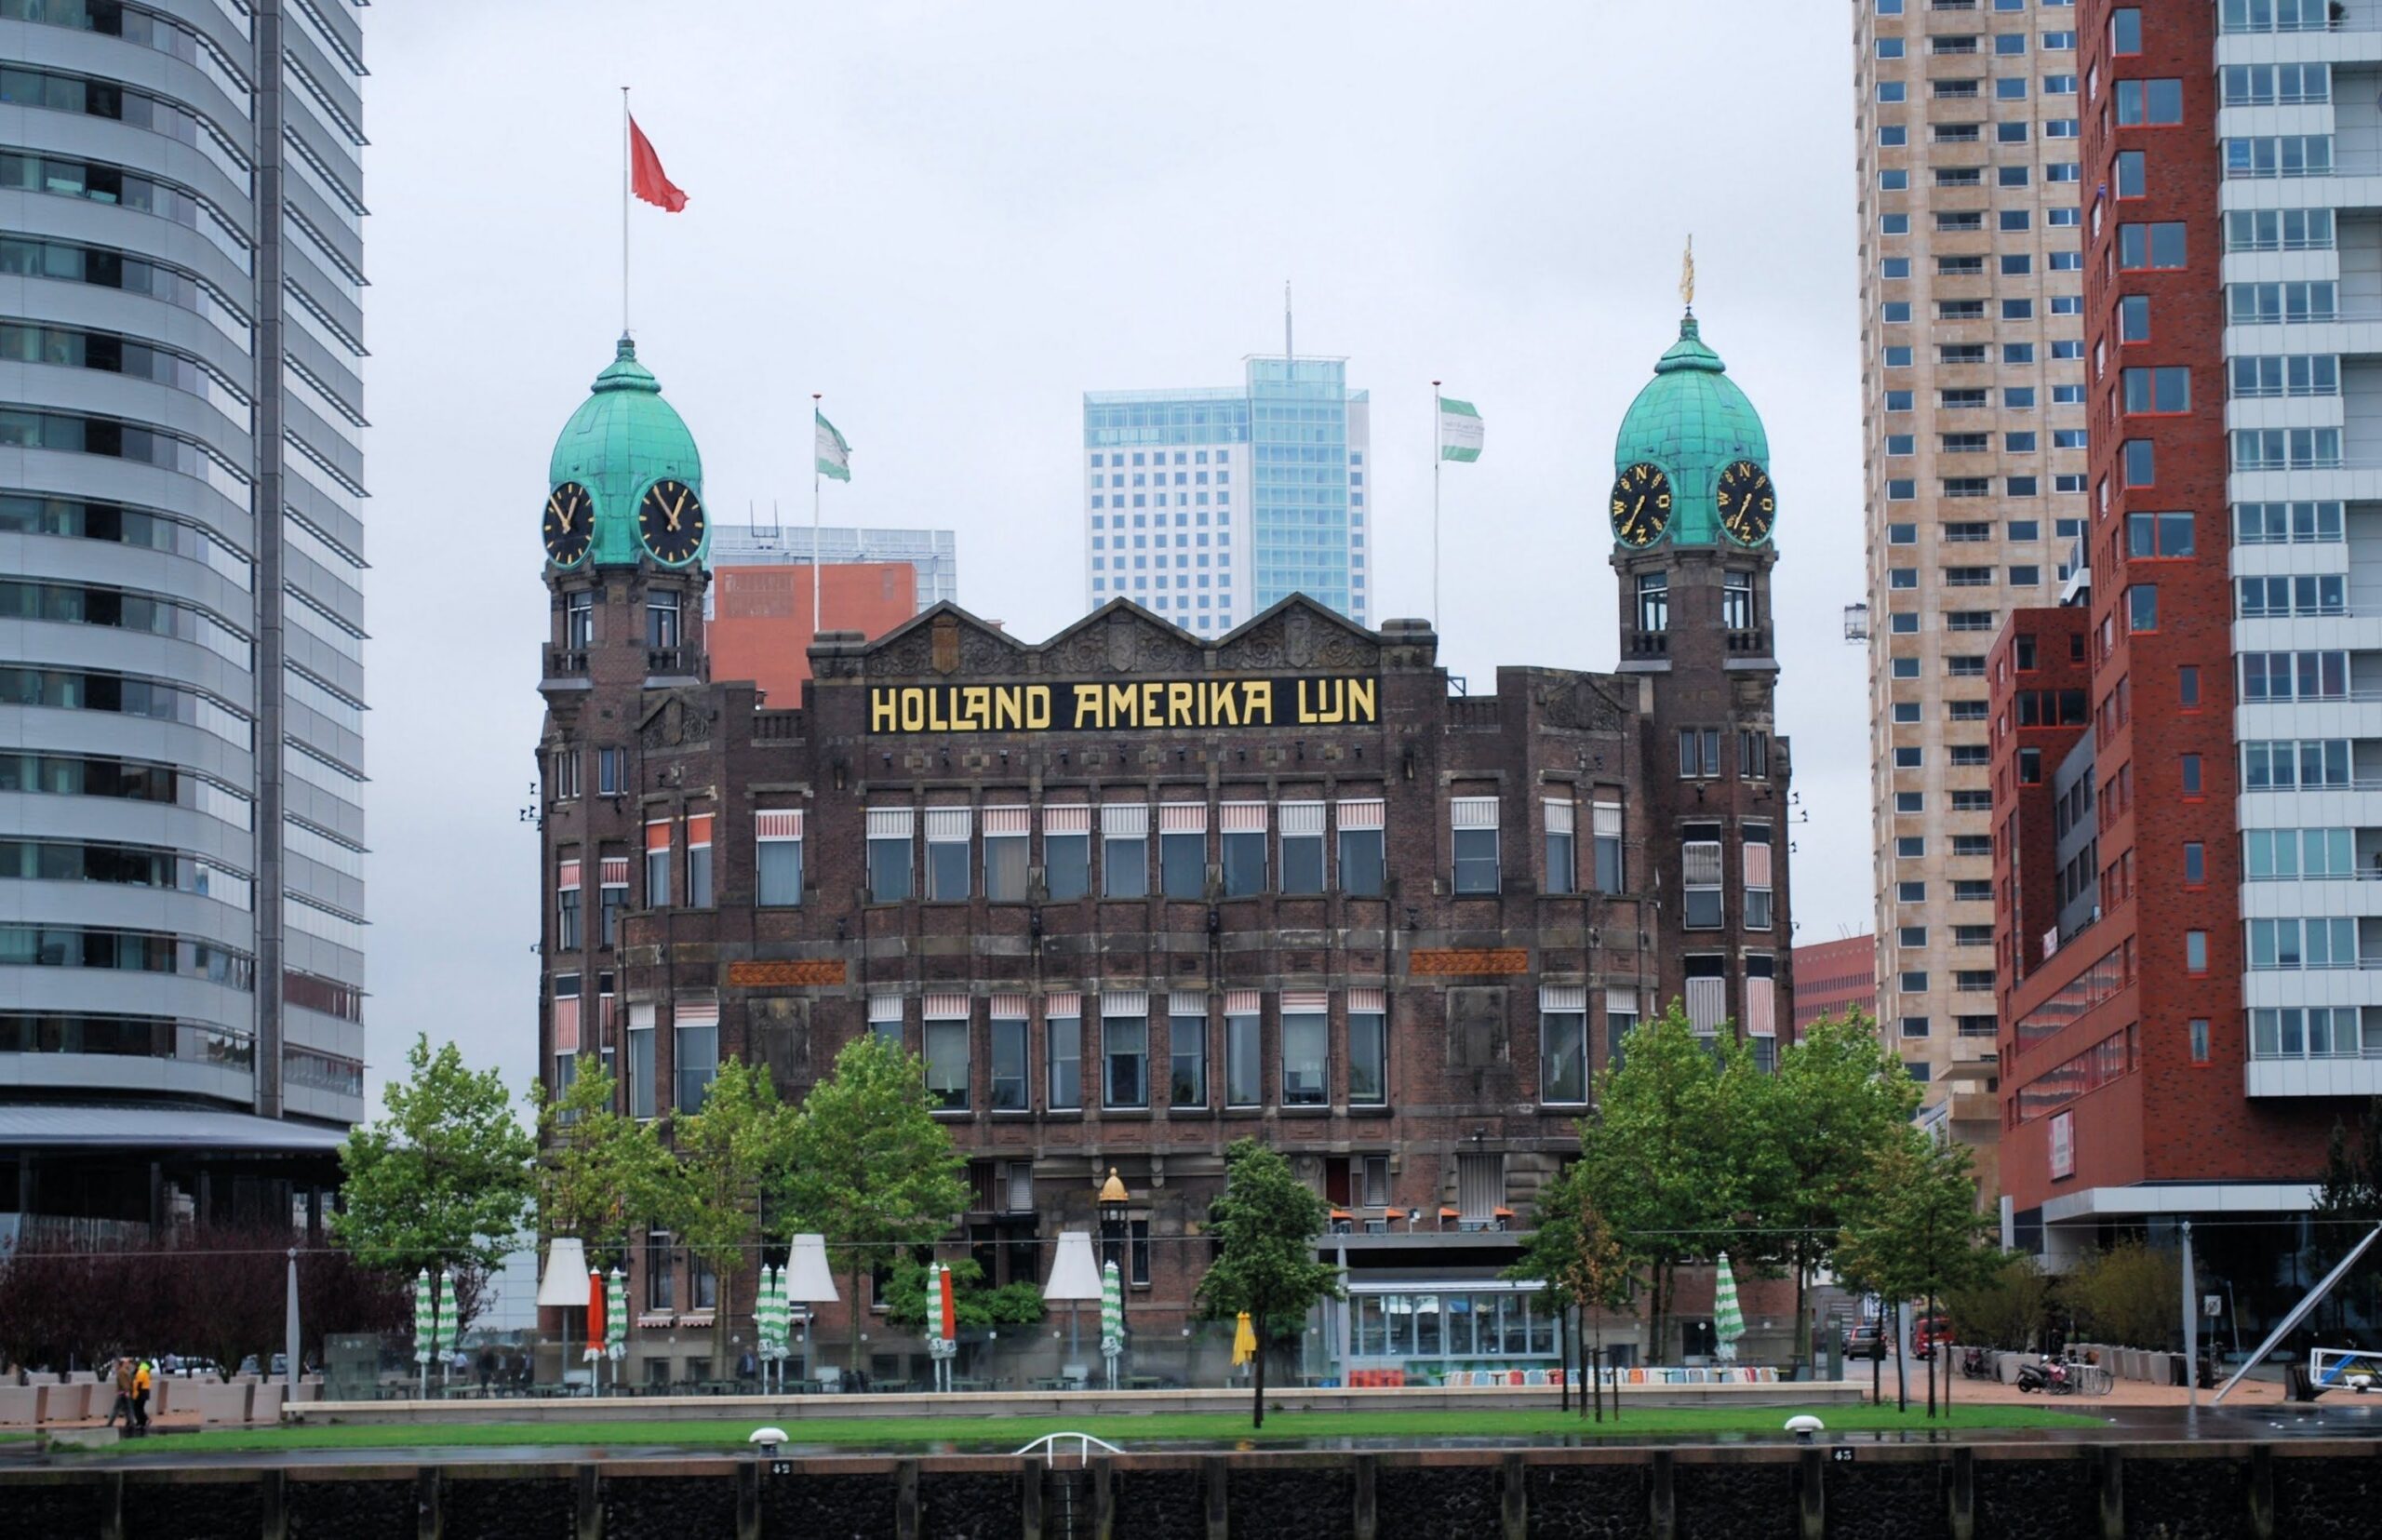 The history of Hotel New York in Rotterdam